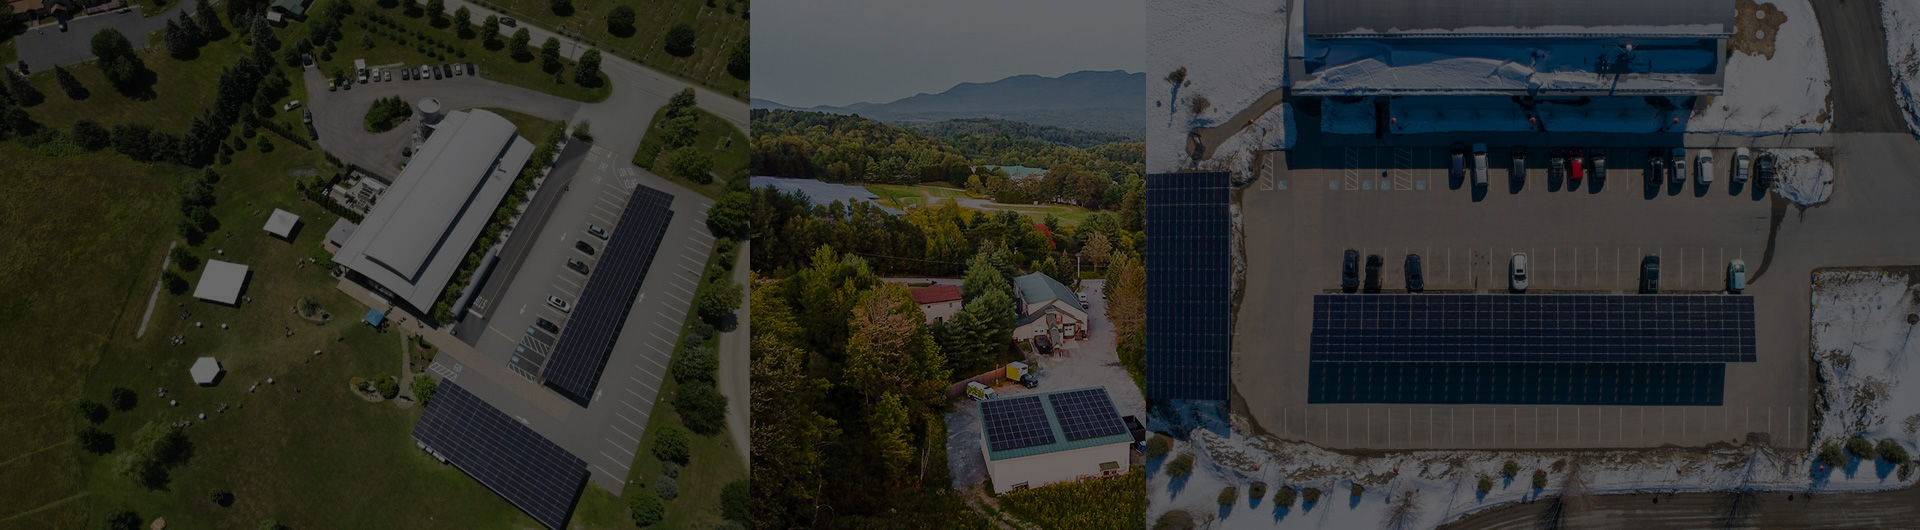 Aerial photos of our solar panels at our Stowe and Waterbury breweries.